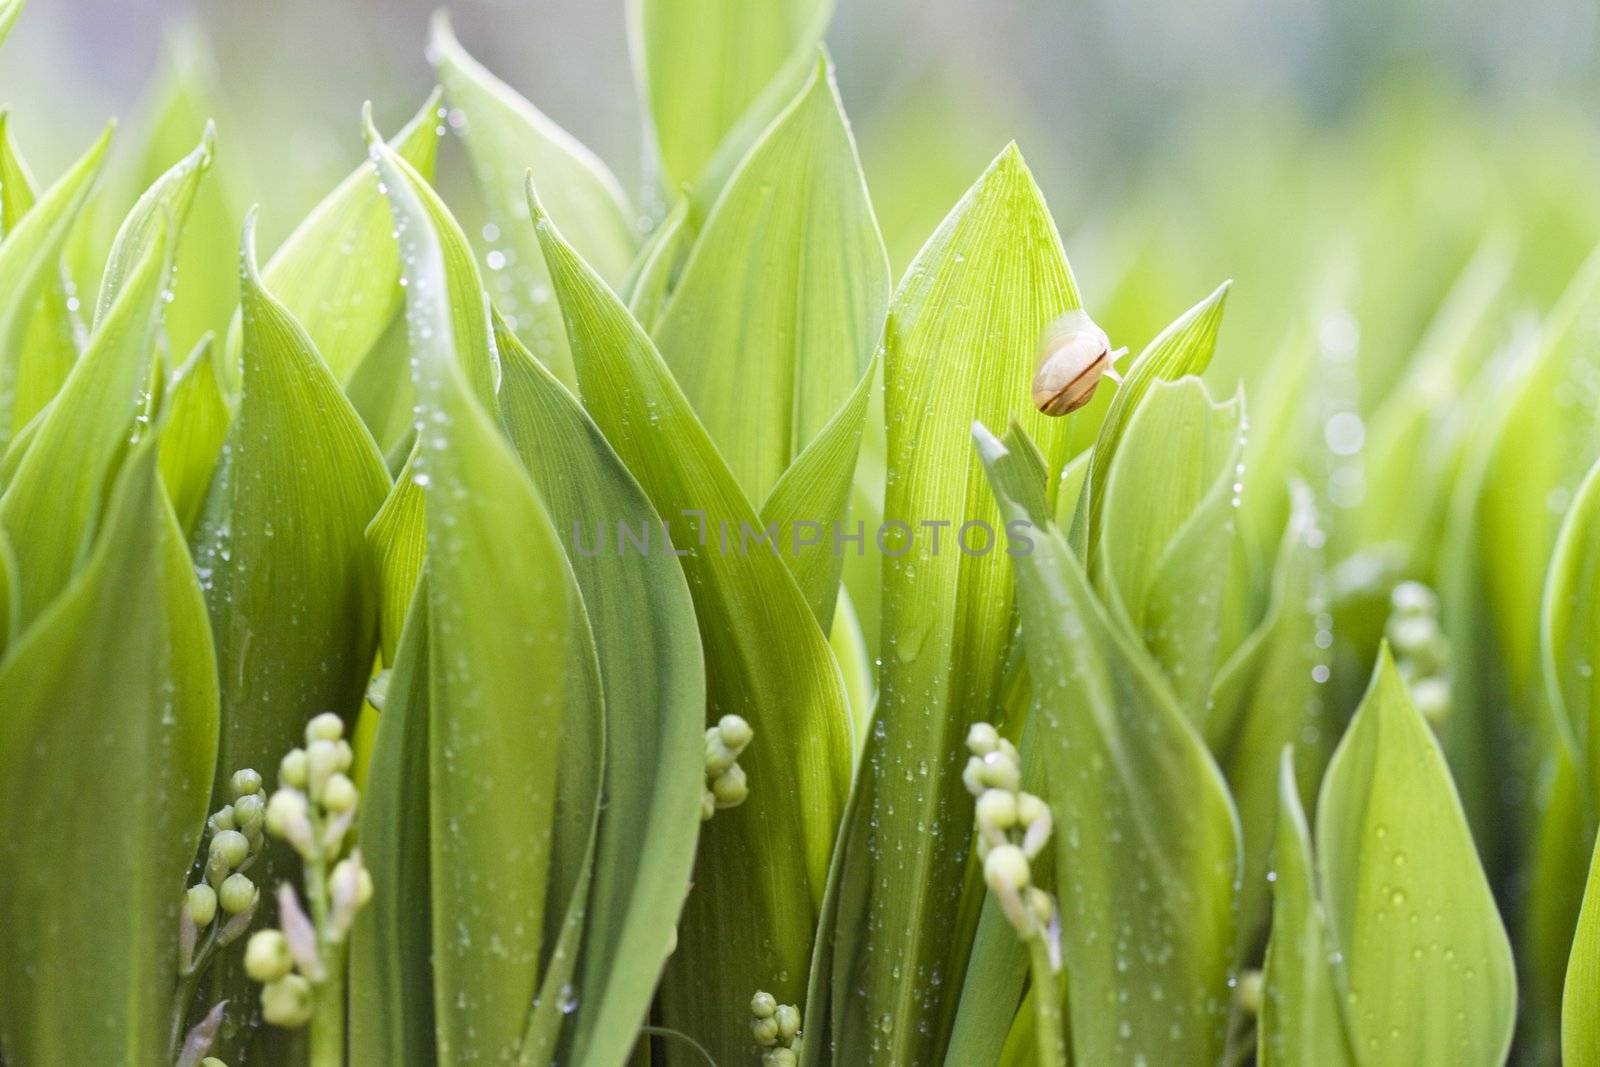 Green wet leafs of lilies with little snail